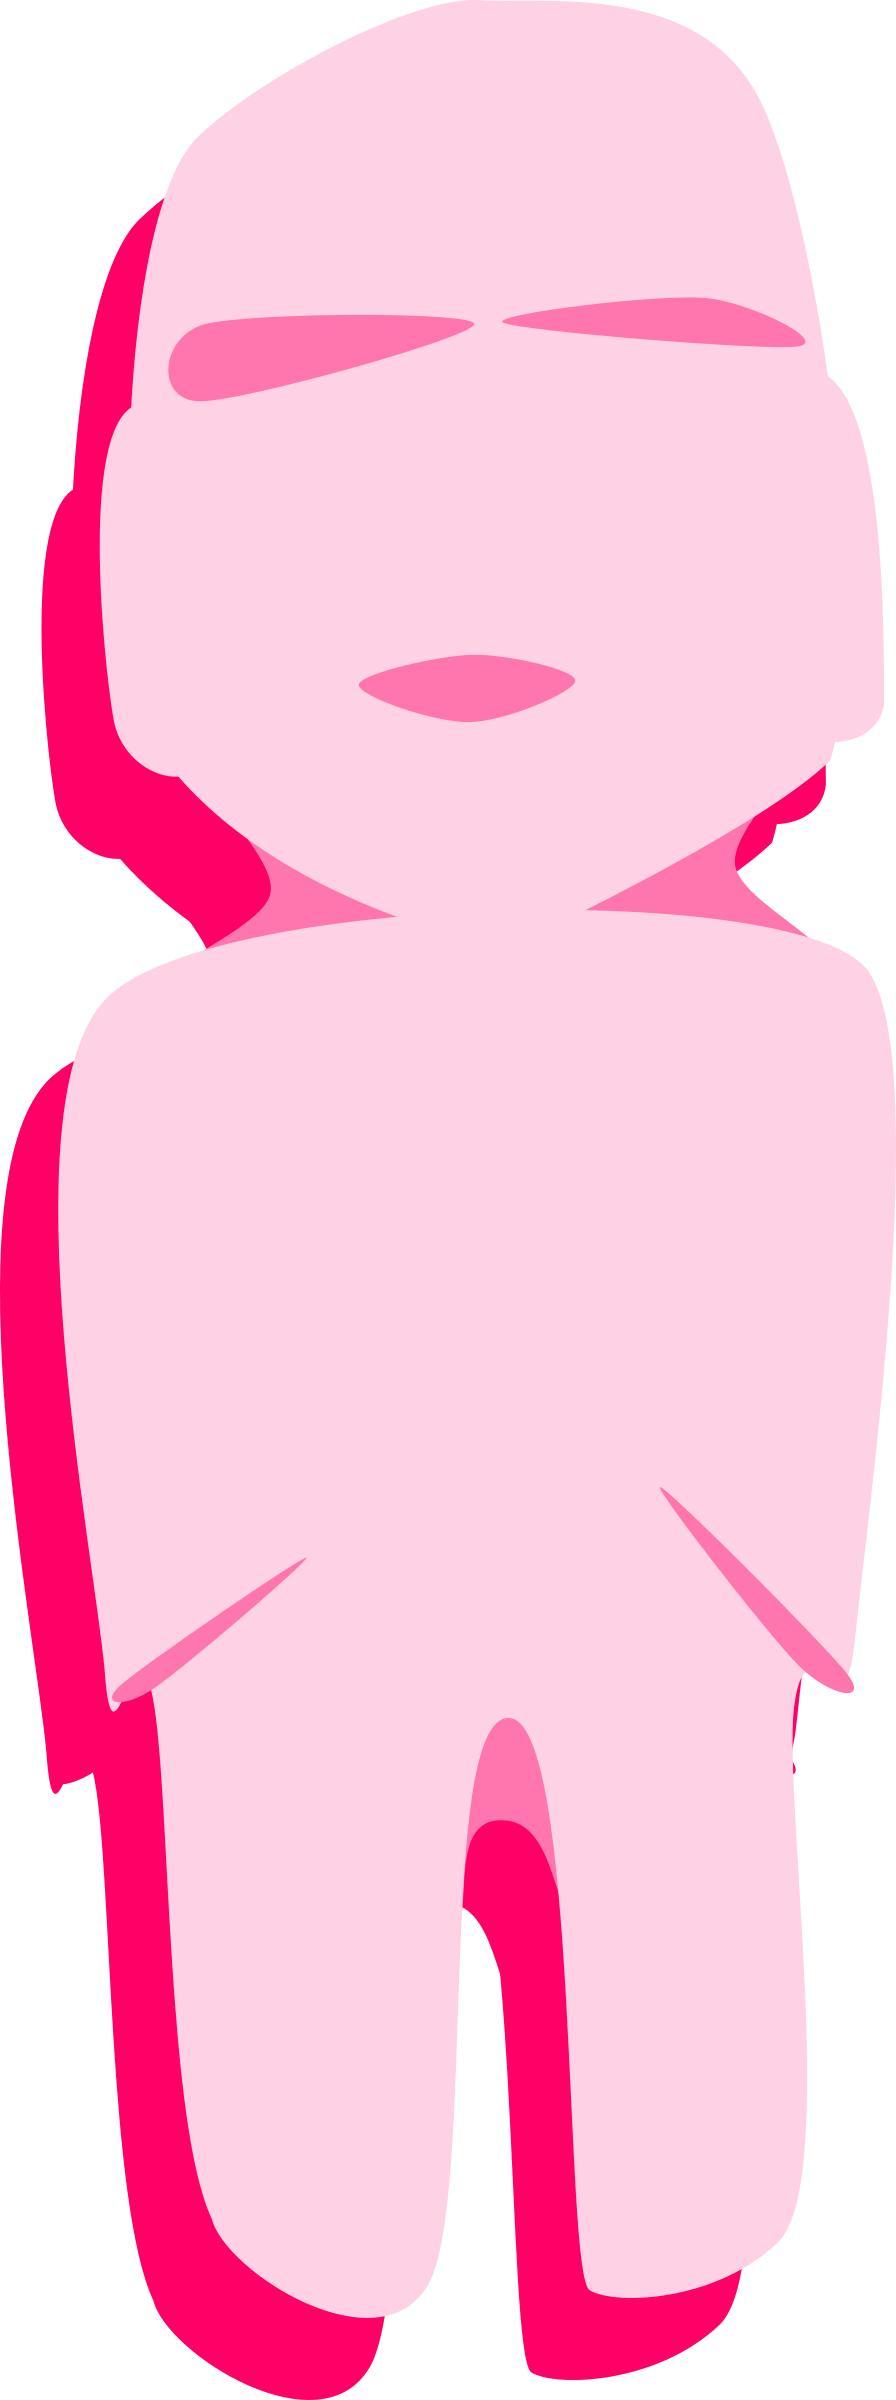 Mexican Chisel-man in Pink png transparent